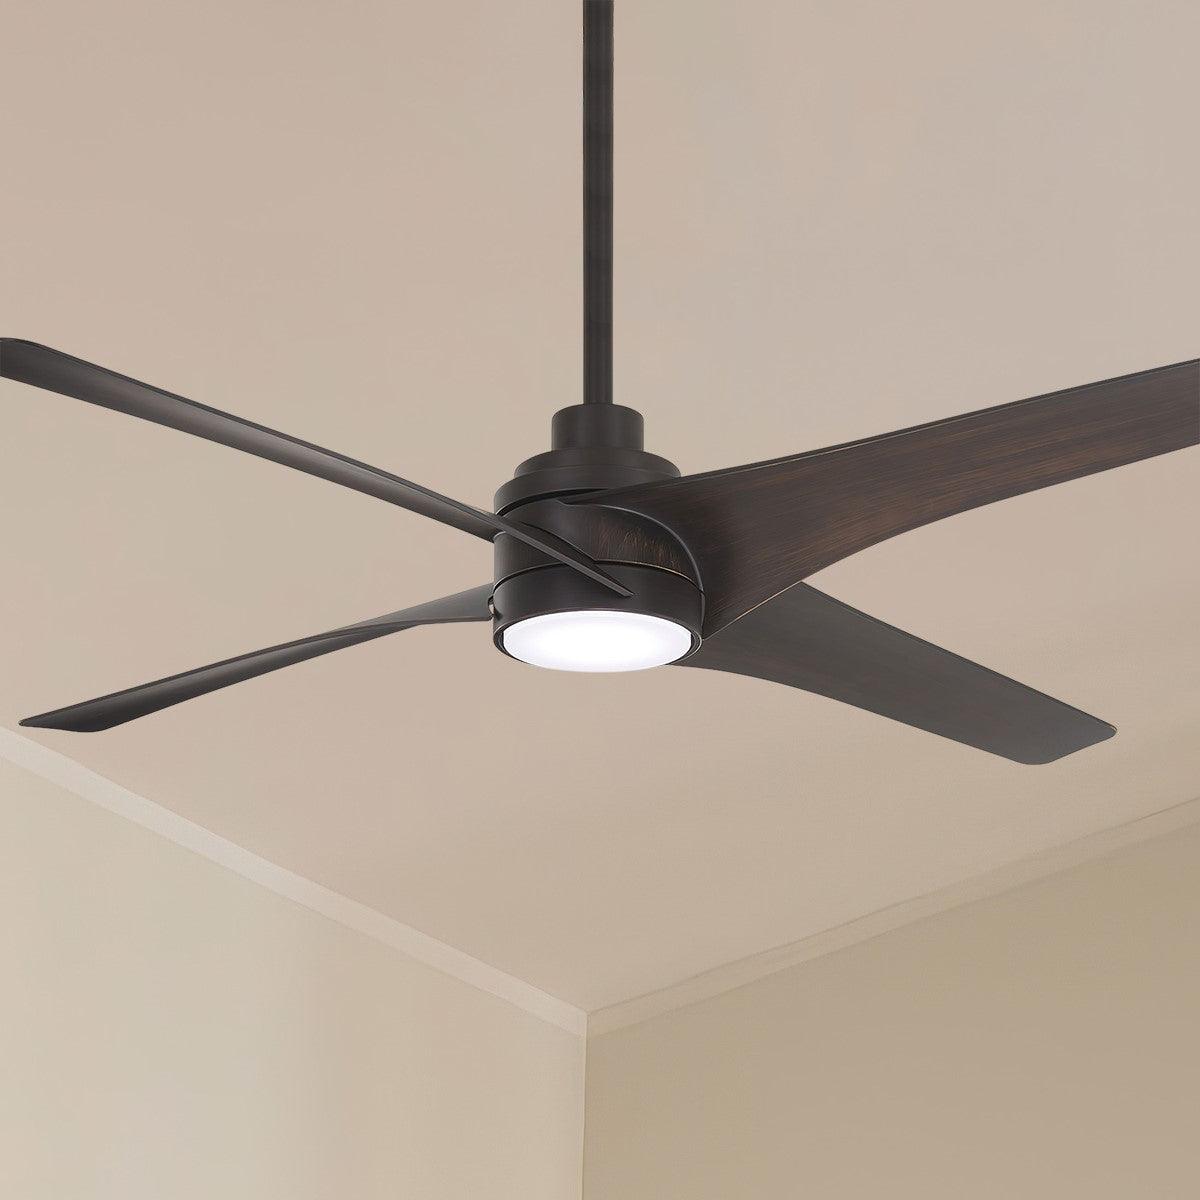 Swept 56 Inch Contemporary Ceiling Fan With Light And Remote